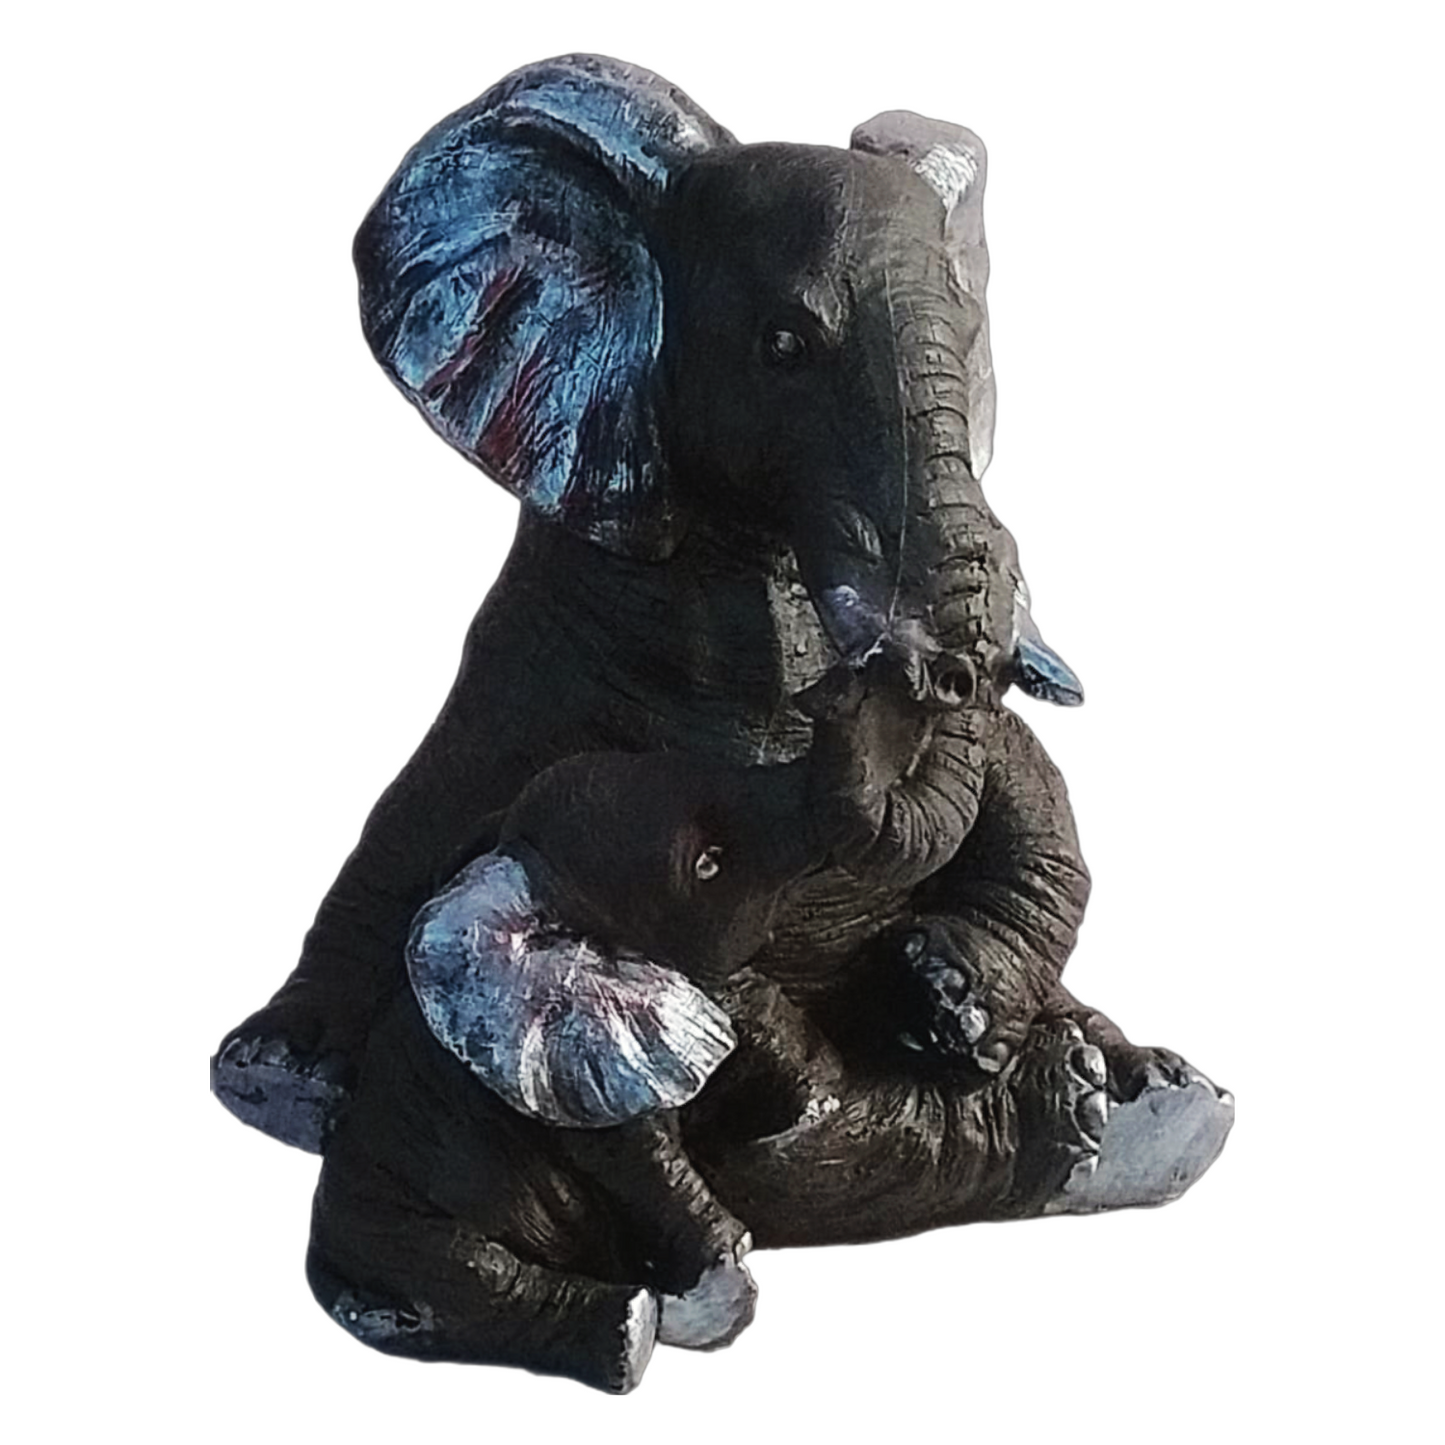 Statue ALiLA Elephant with Kid Real Original Looking Statue Showpiece Idol for Gifting & Home Table Decoration, 7.5 inches Height Statue